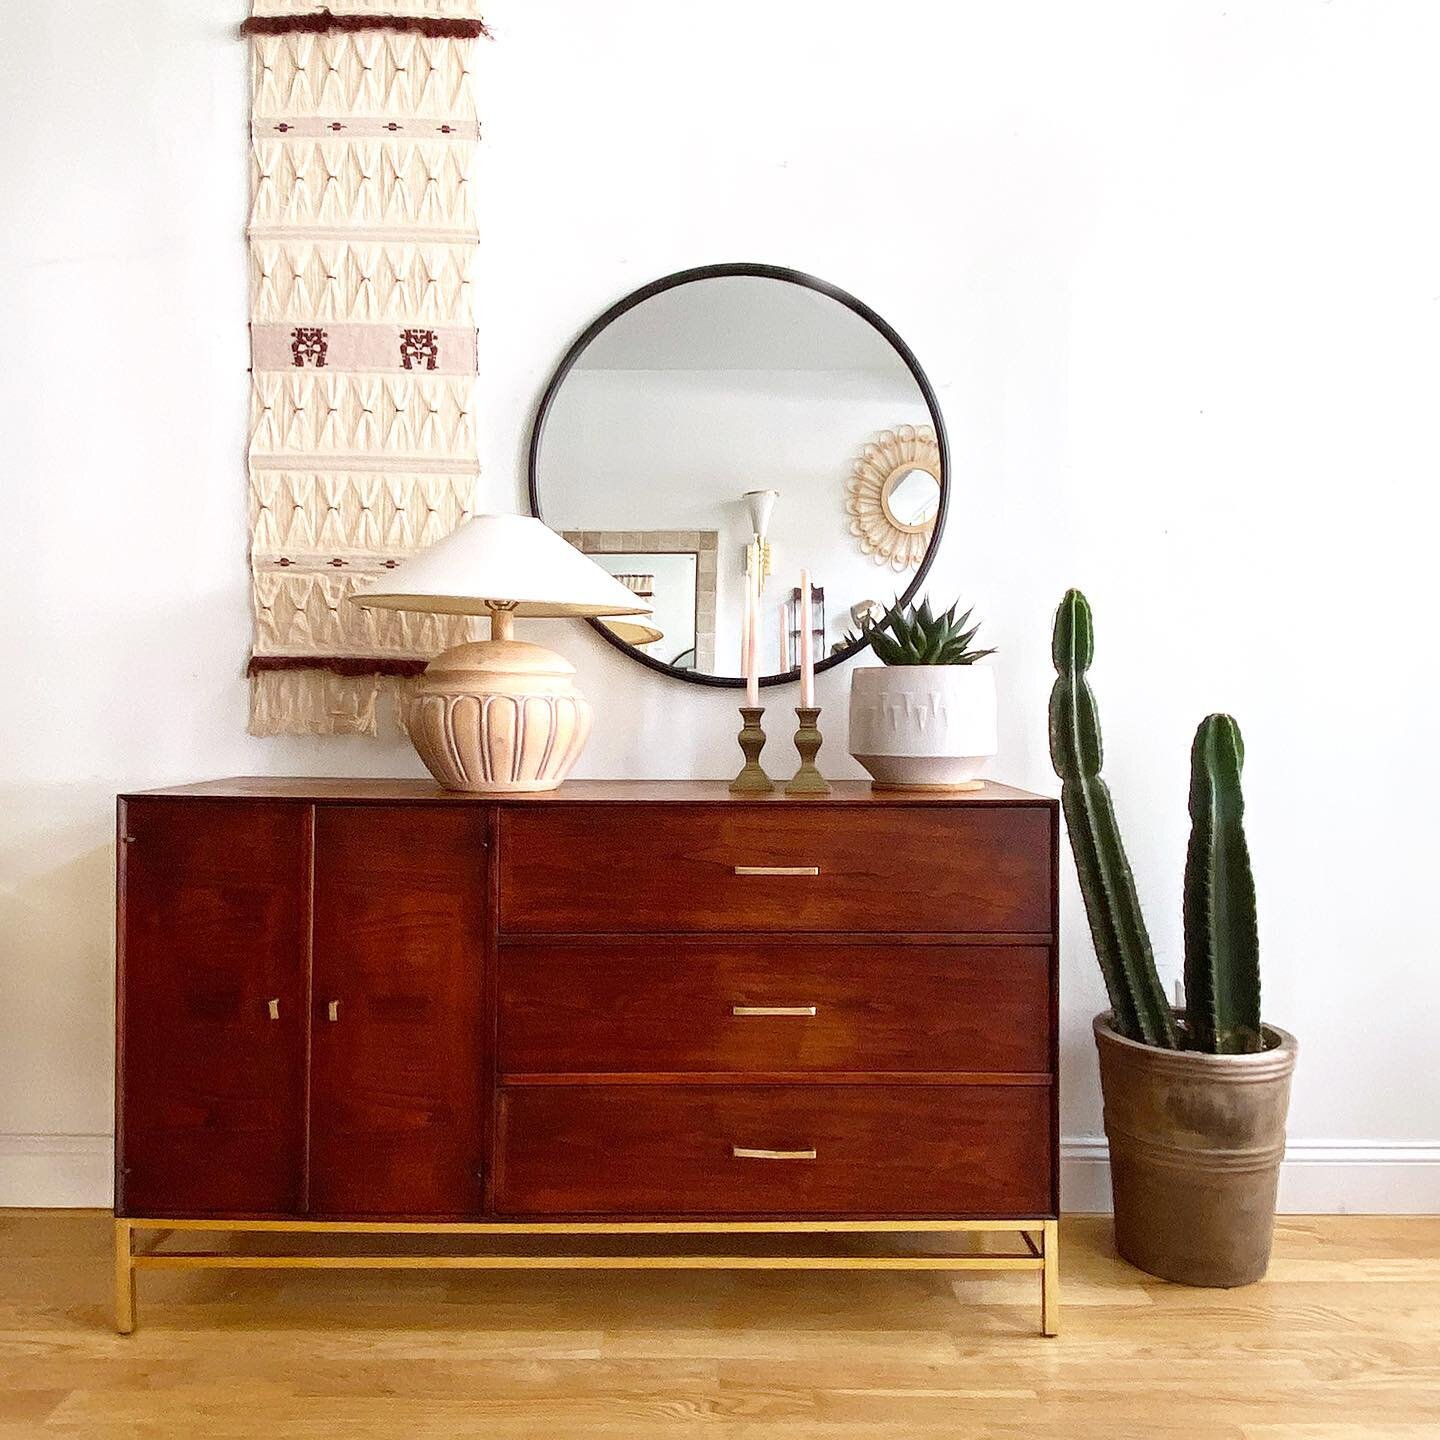 A great small scale credenza. Walnut inlay details and brass hardware. SOLD
56&rdquo; long x 19&rdquo; deep x 32.5&rdquo; tall

Black Round Mirror SOLD
Table Lamp $125
Weaving SOLD